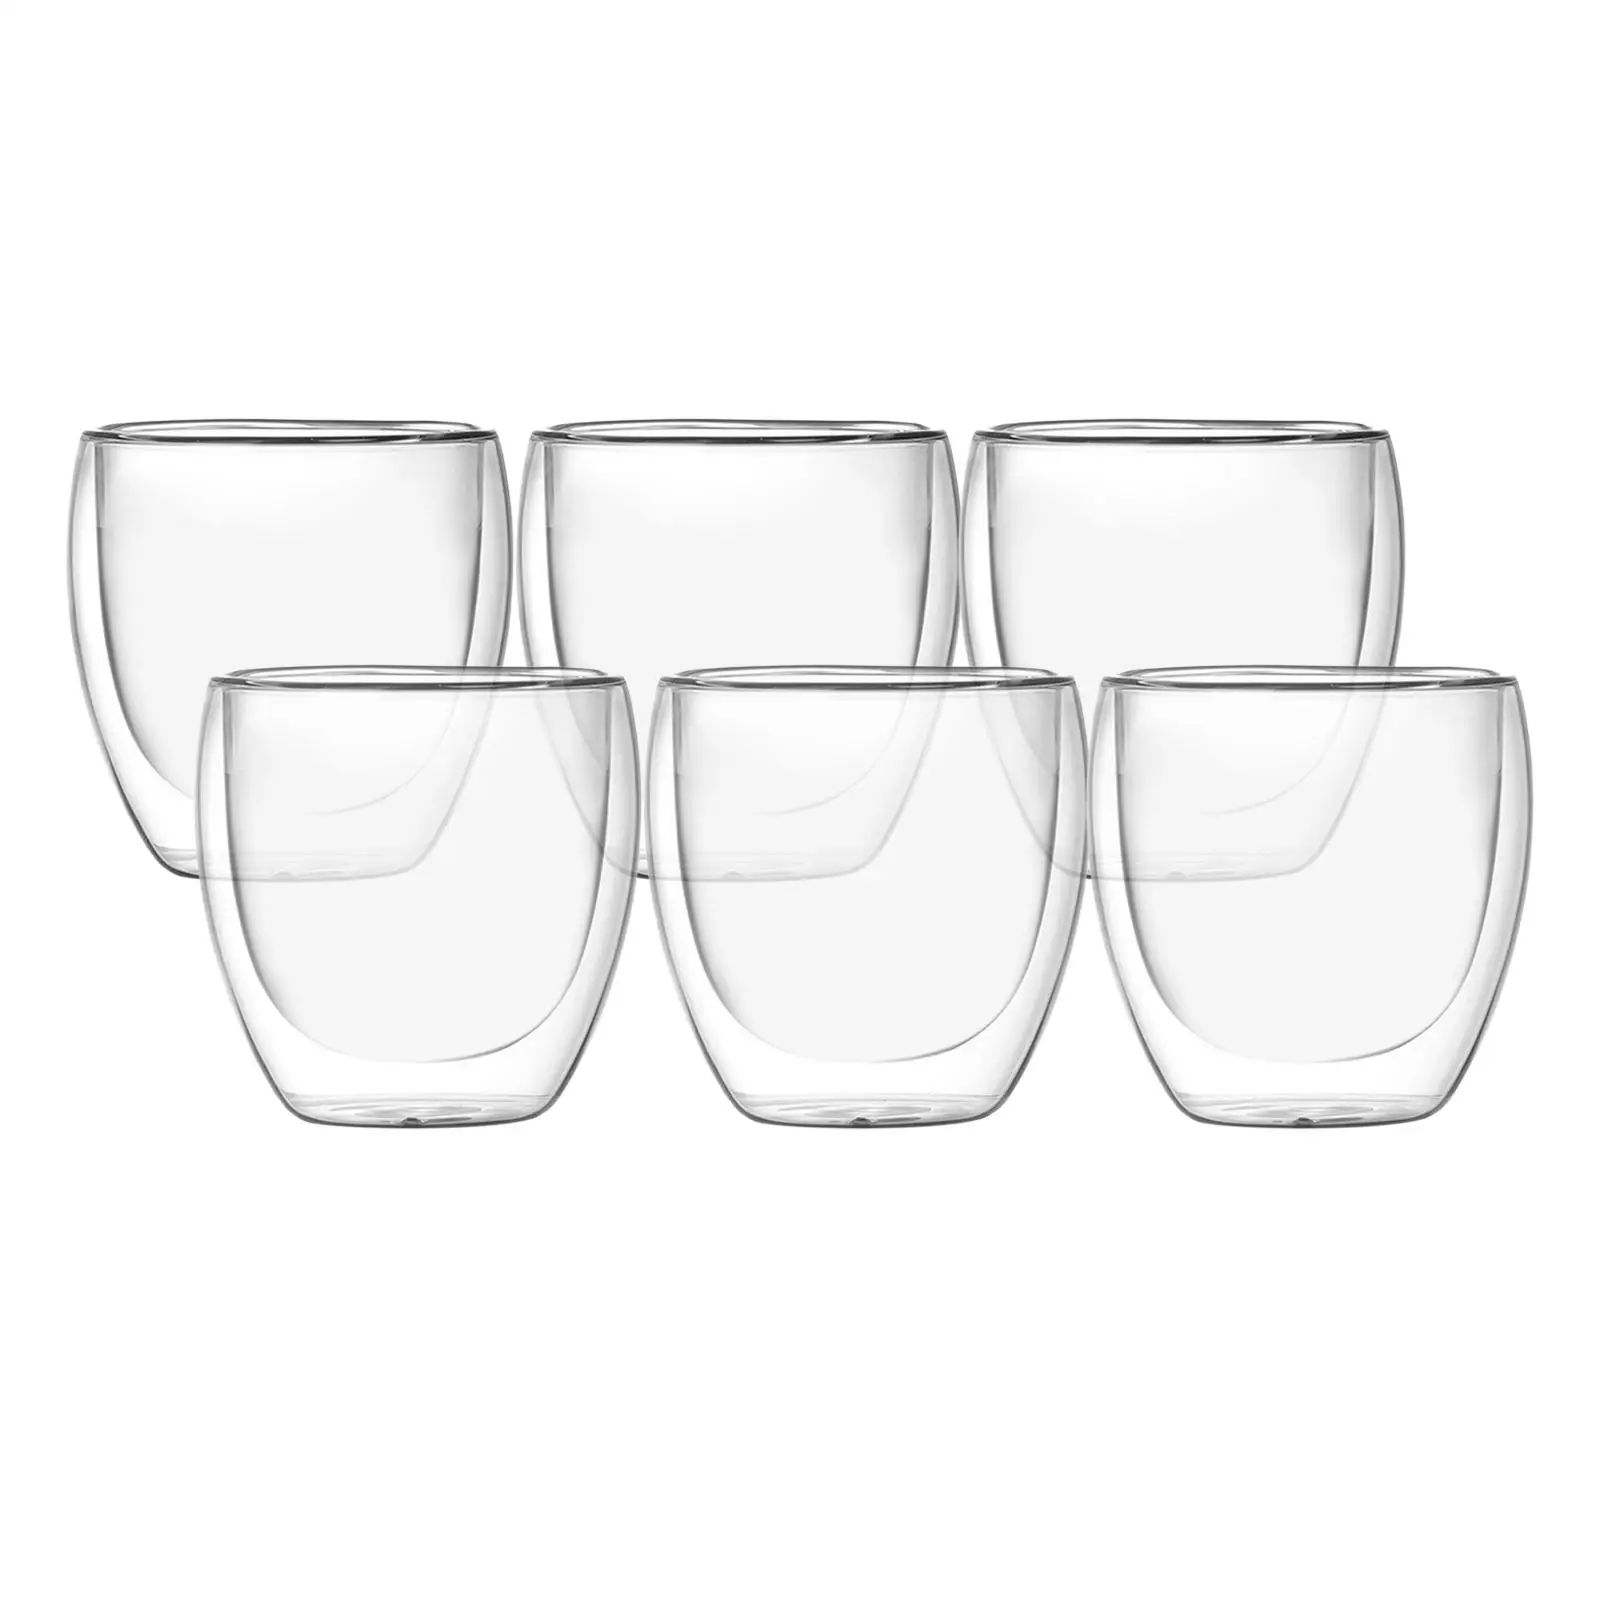 6x Double wall Coffee Cups 80ml Clear Insulated Drinking Glasses Mugs for Tea Beverage Coffee Cappuccinos Latte